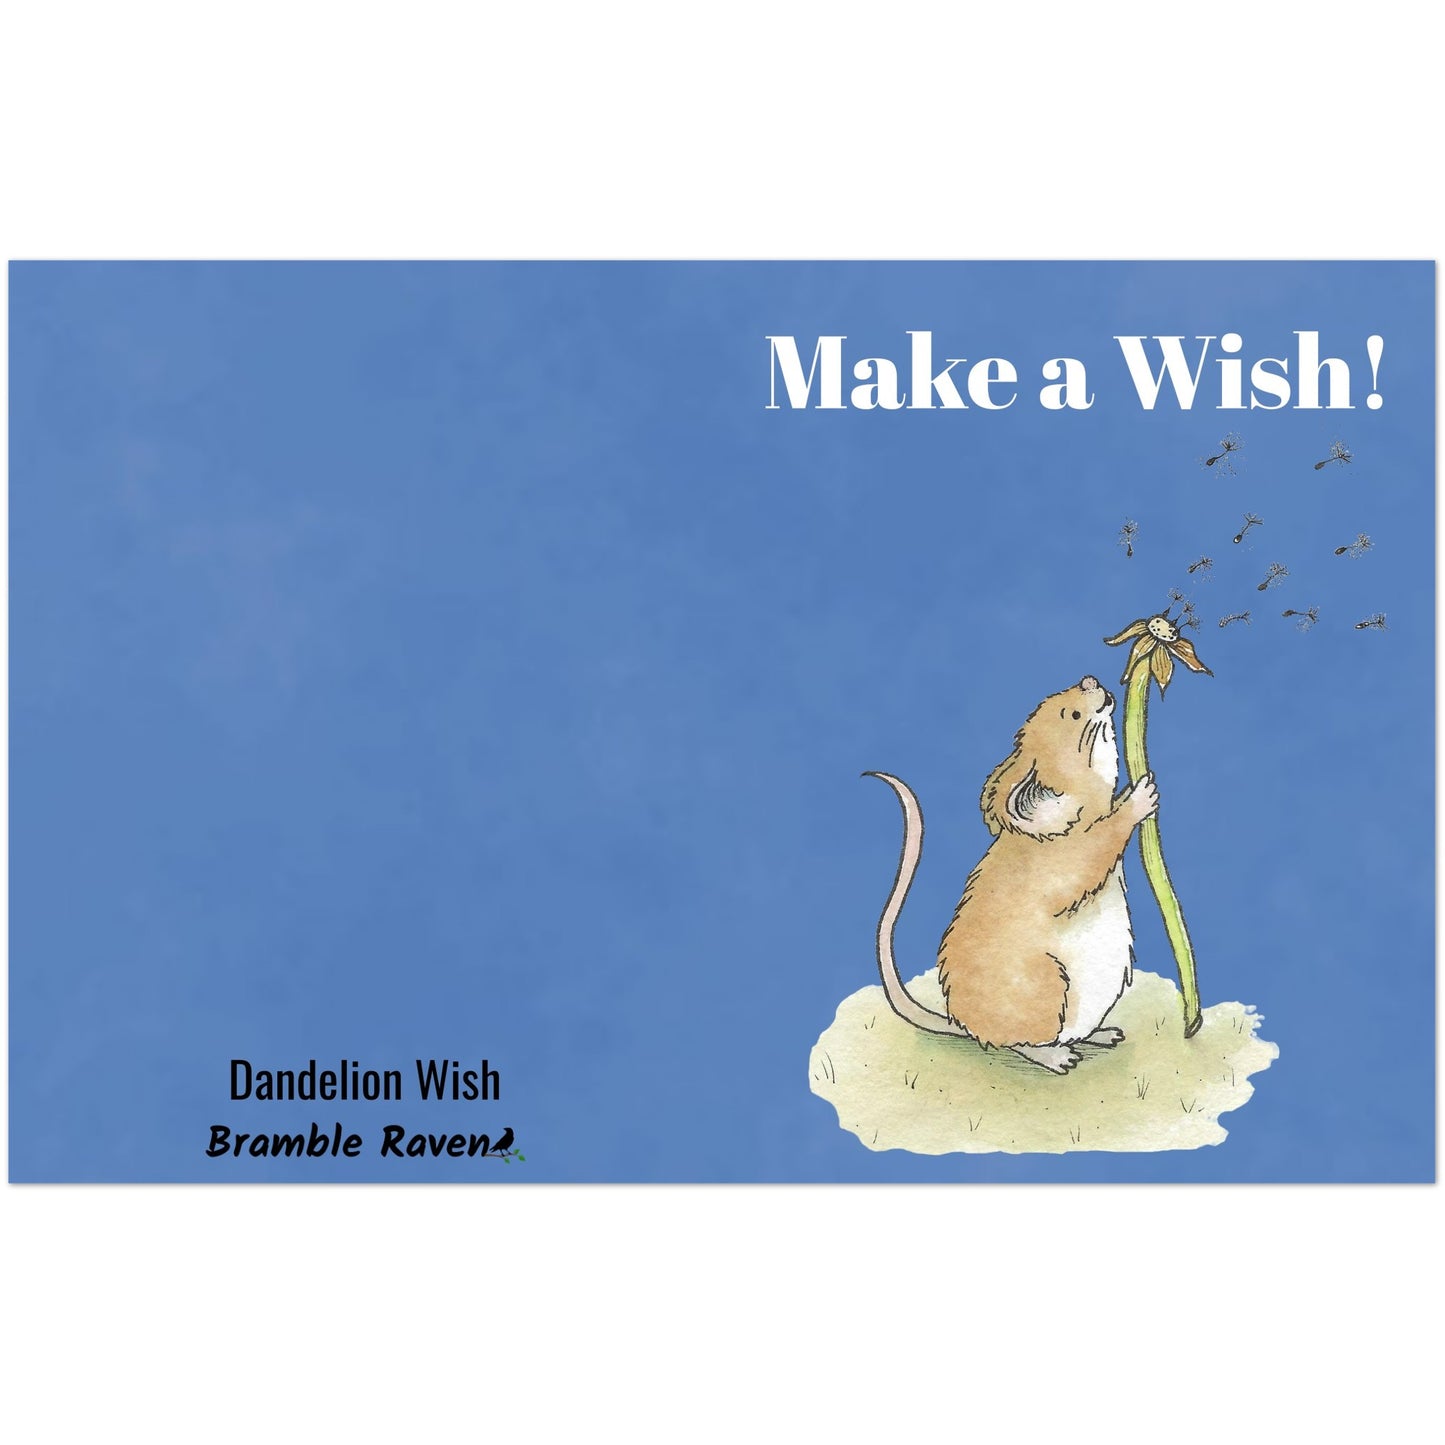 Ten fun greeting cards with envelopes. The front features white "Make a wish!" text and our watercolor dandelion wish mouse on a blue background. Inside is blank. Made with thick 350 gsm 150lb coated paperboard with vibrant printing.  Cards measure 4.25 by 5.5 inches.